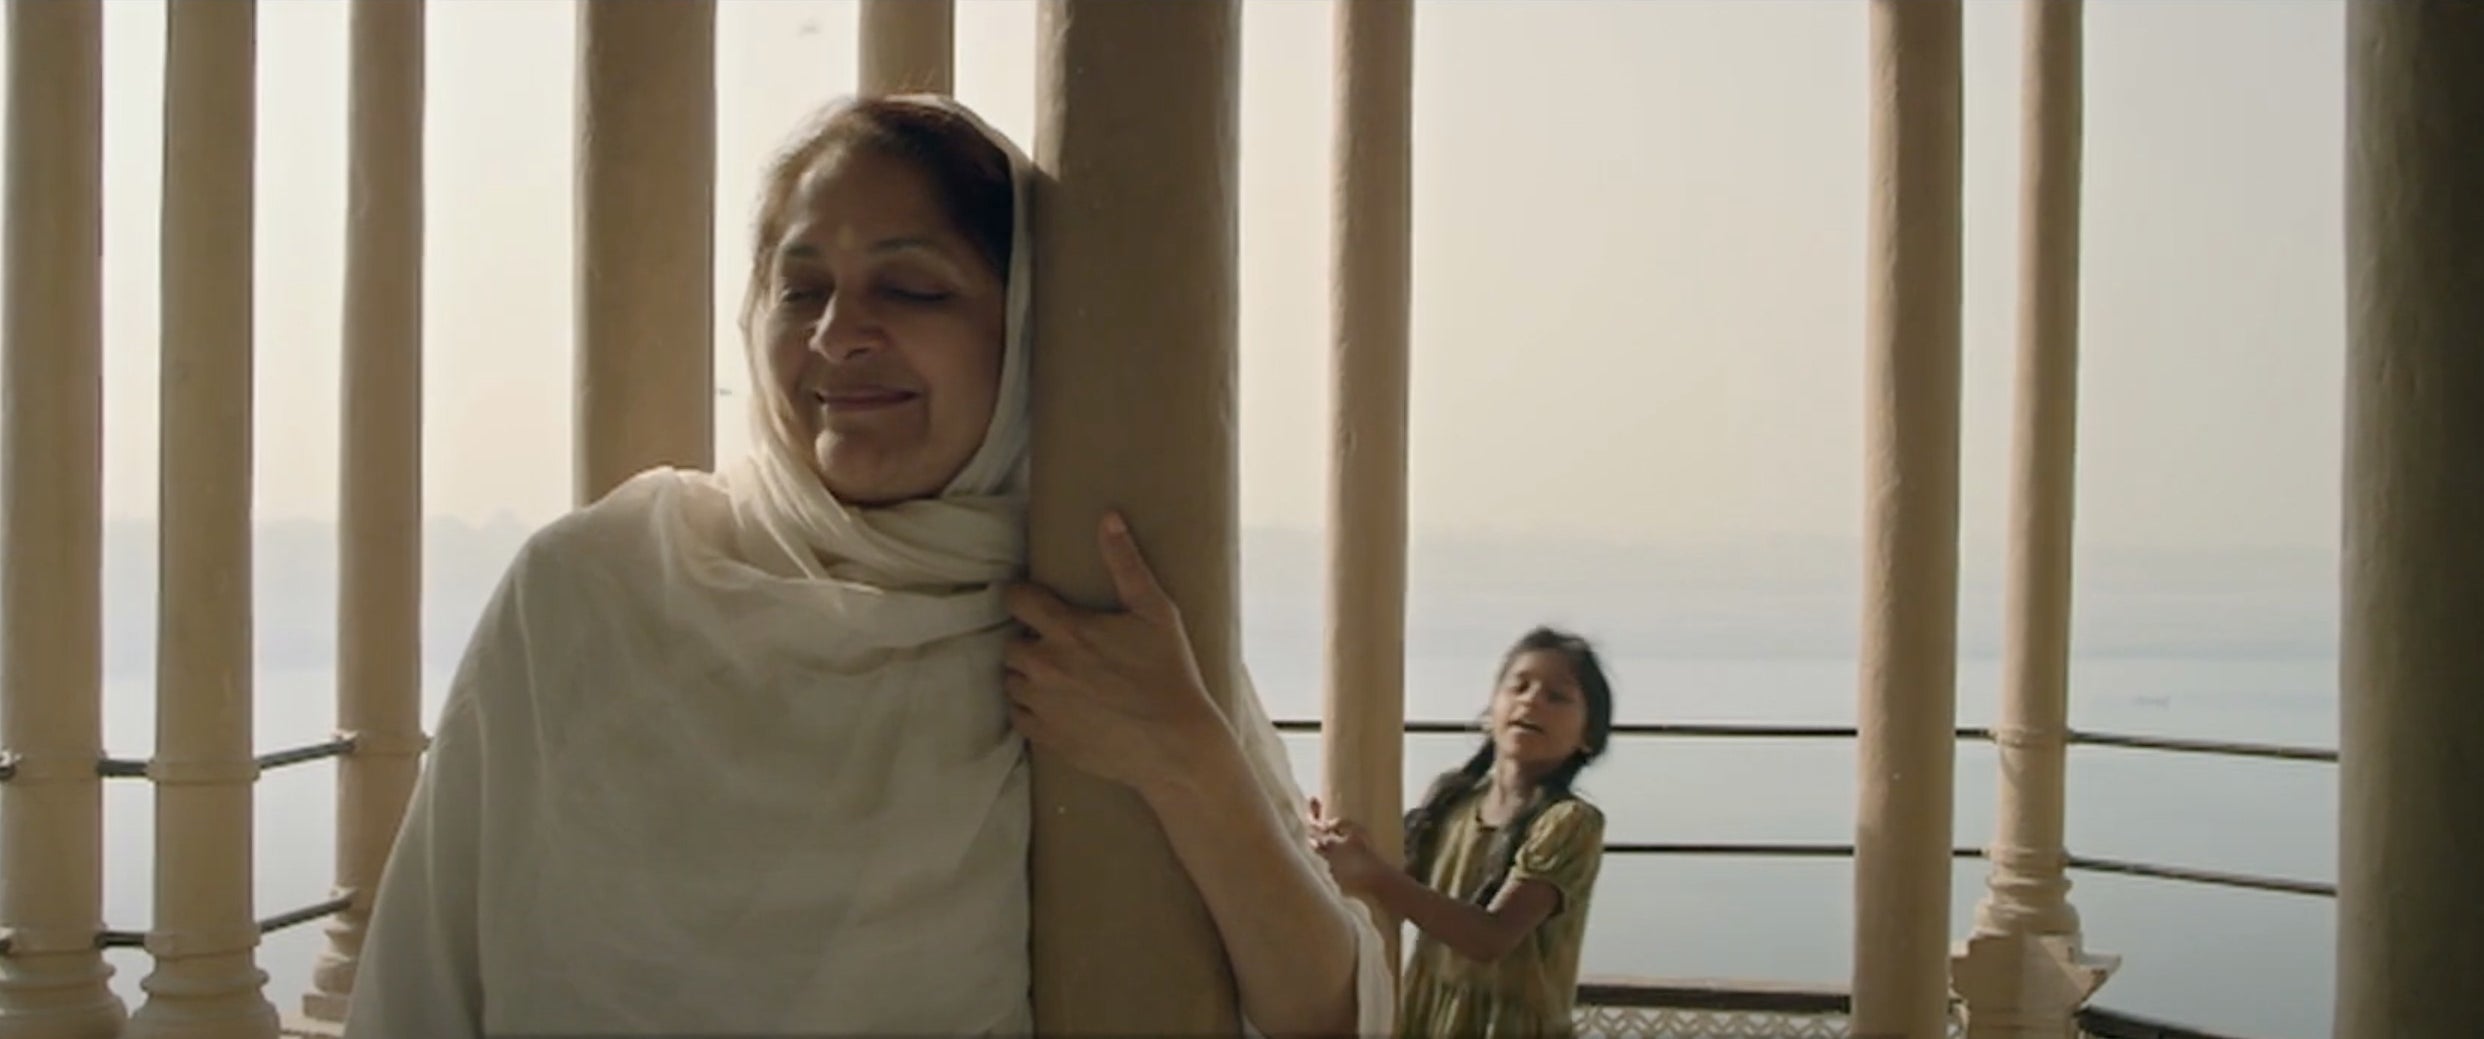 Neena Gupta and Aqsa Siddiqui conversing in a still from the film